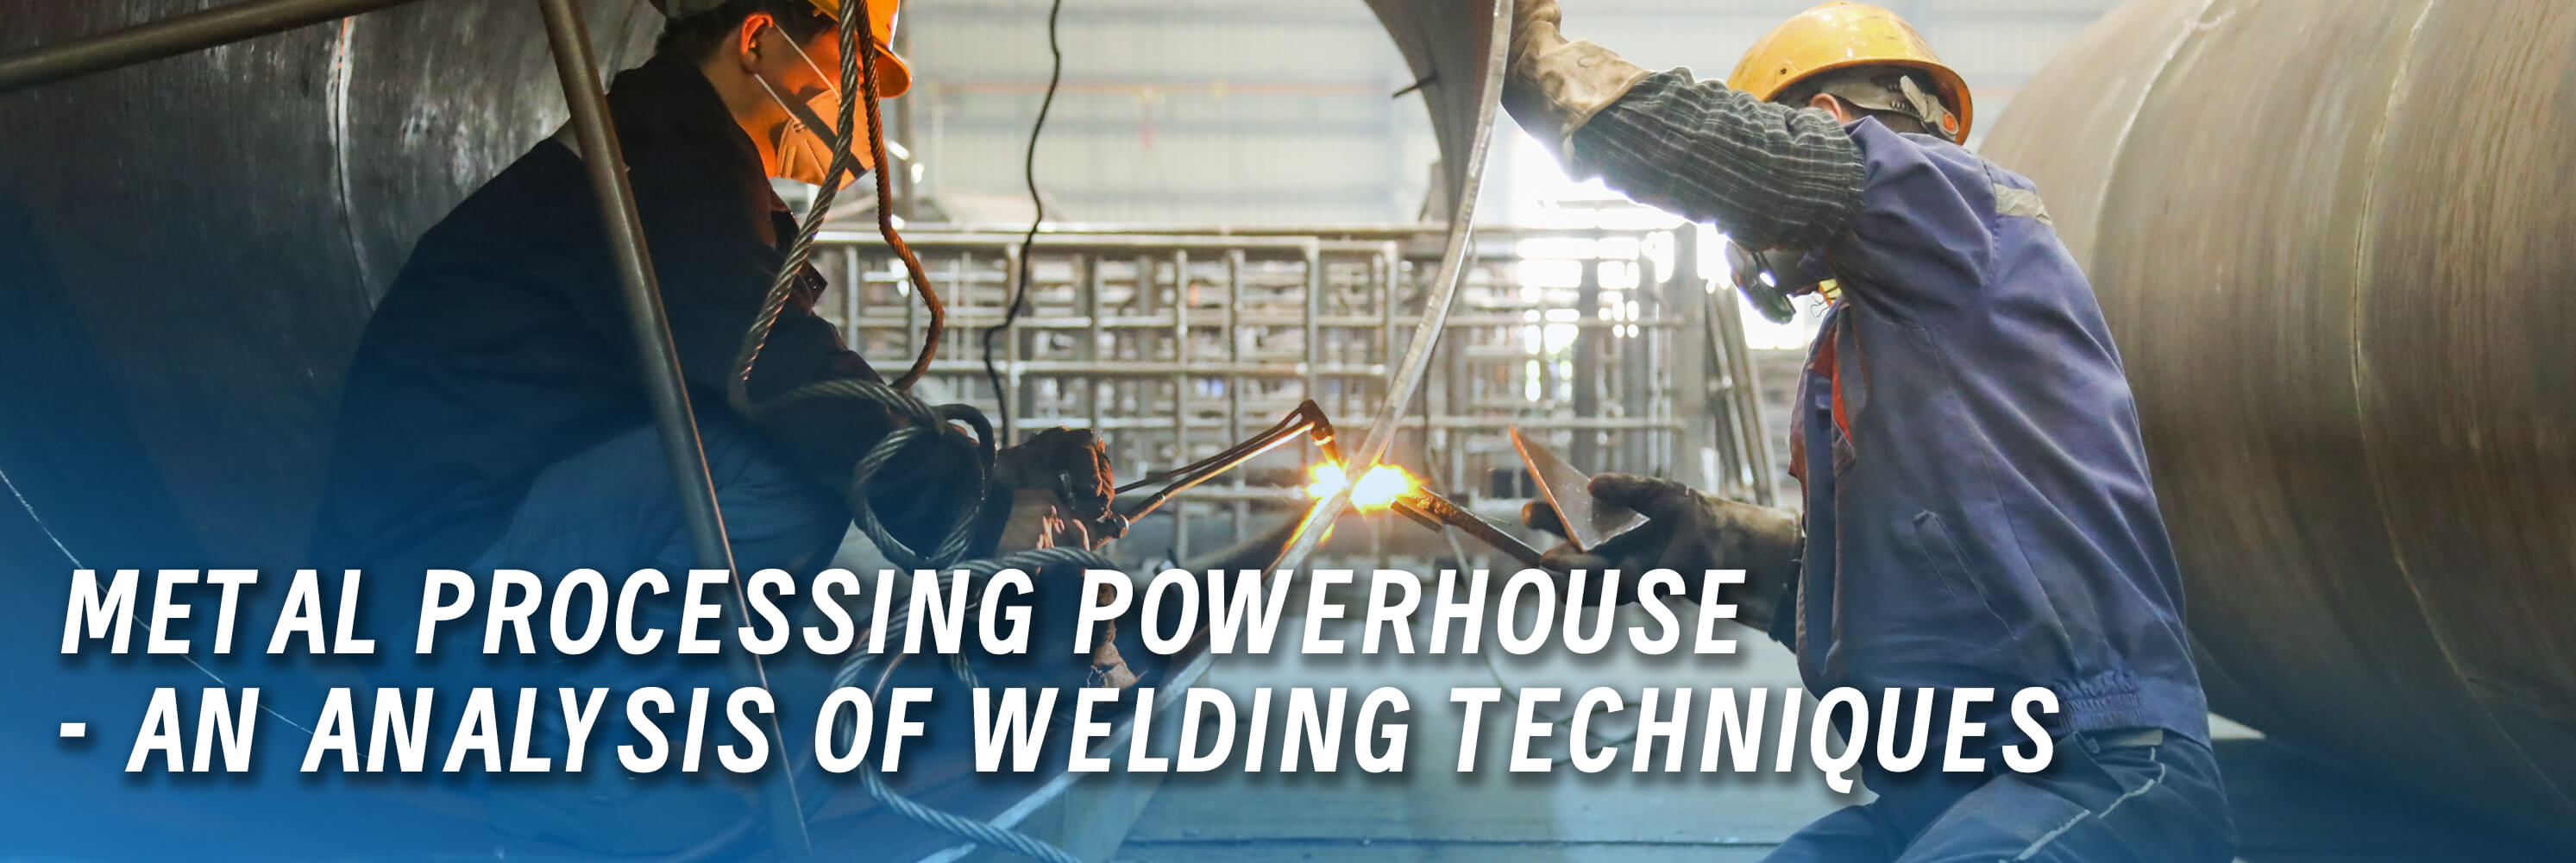 Metal Processing Powerhouse - An Analysis of Welding Techniques